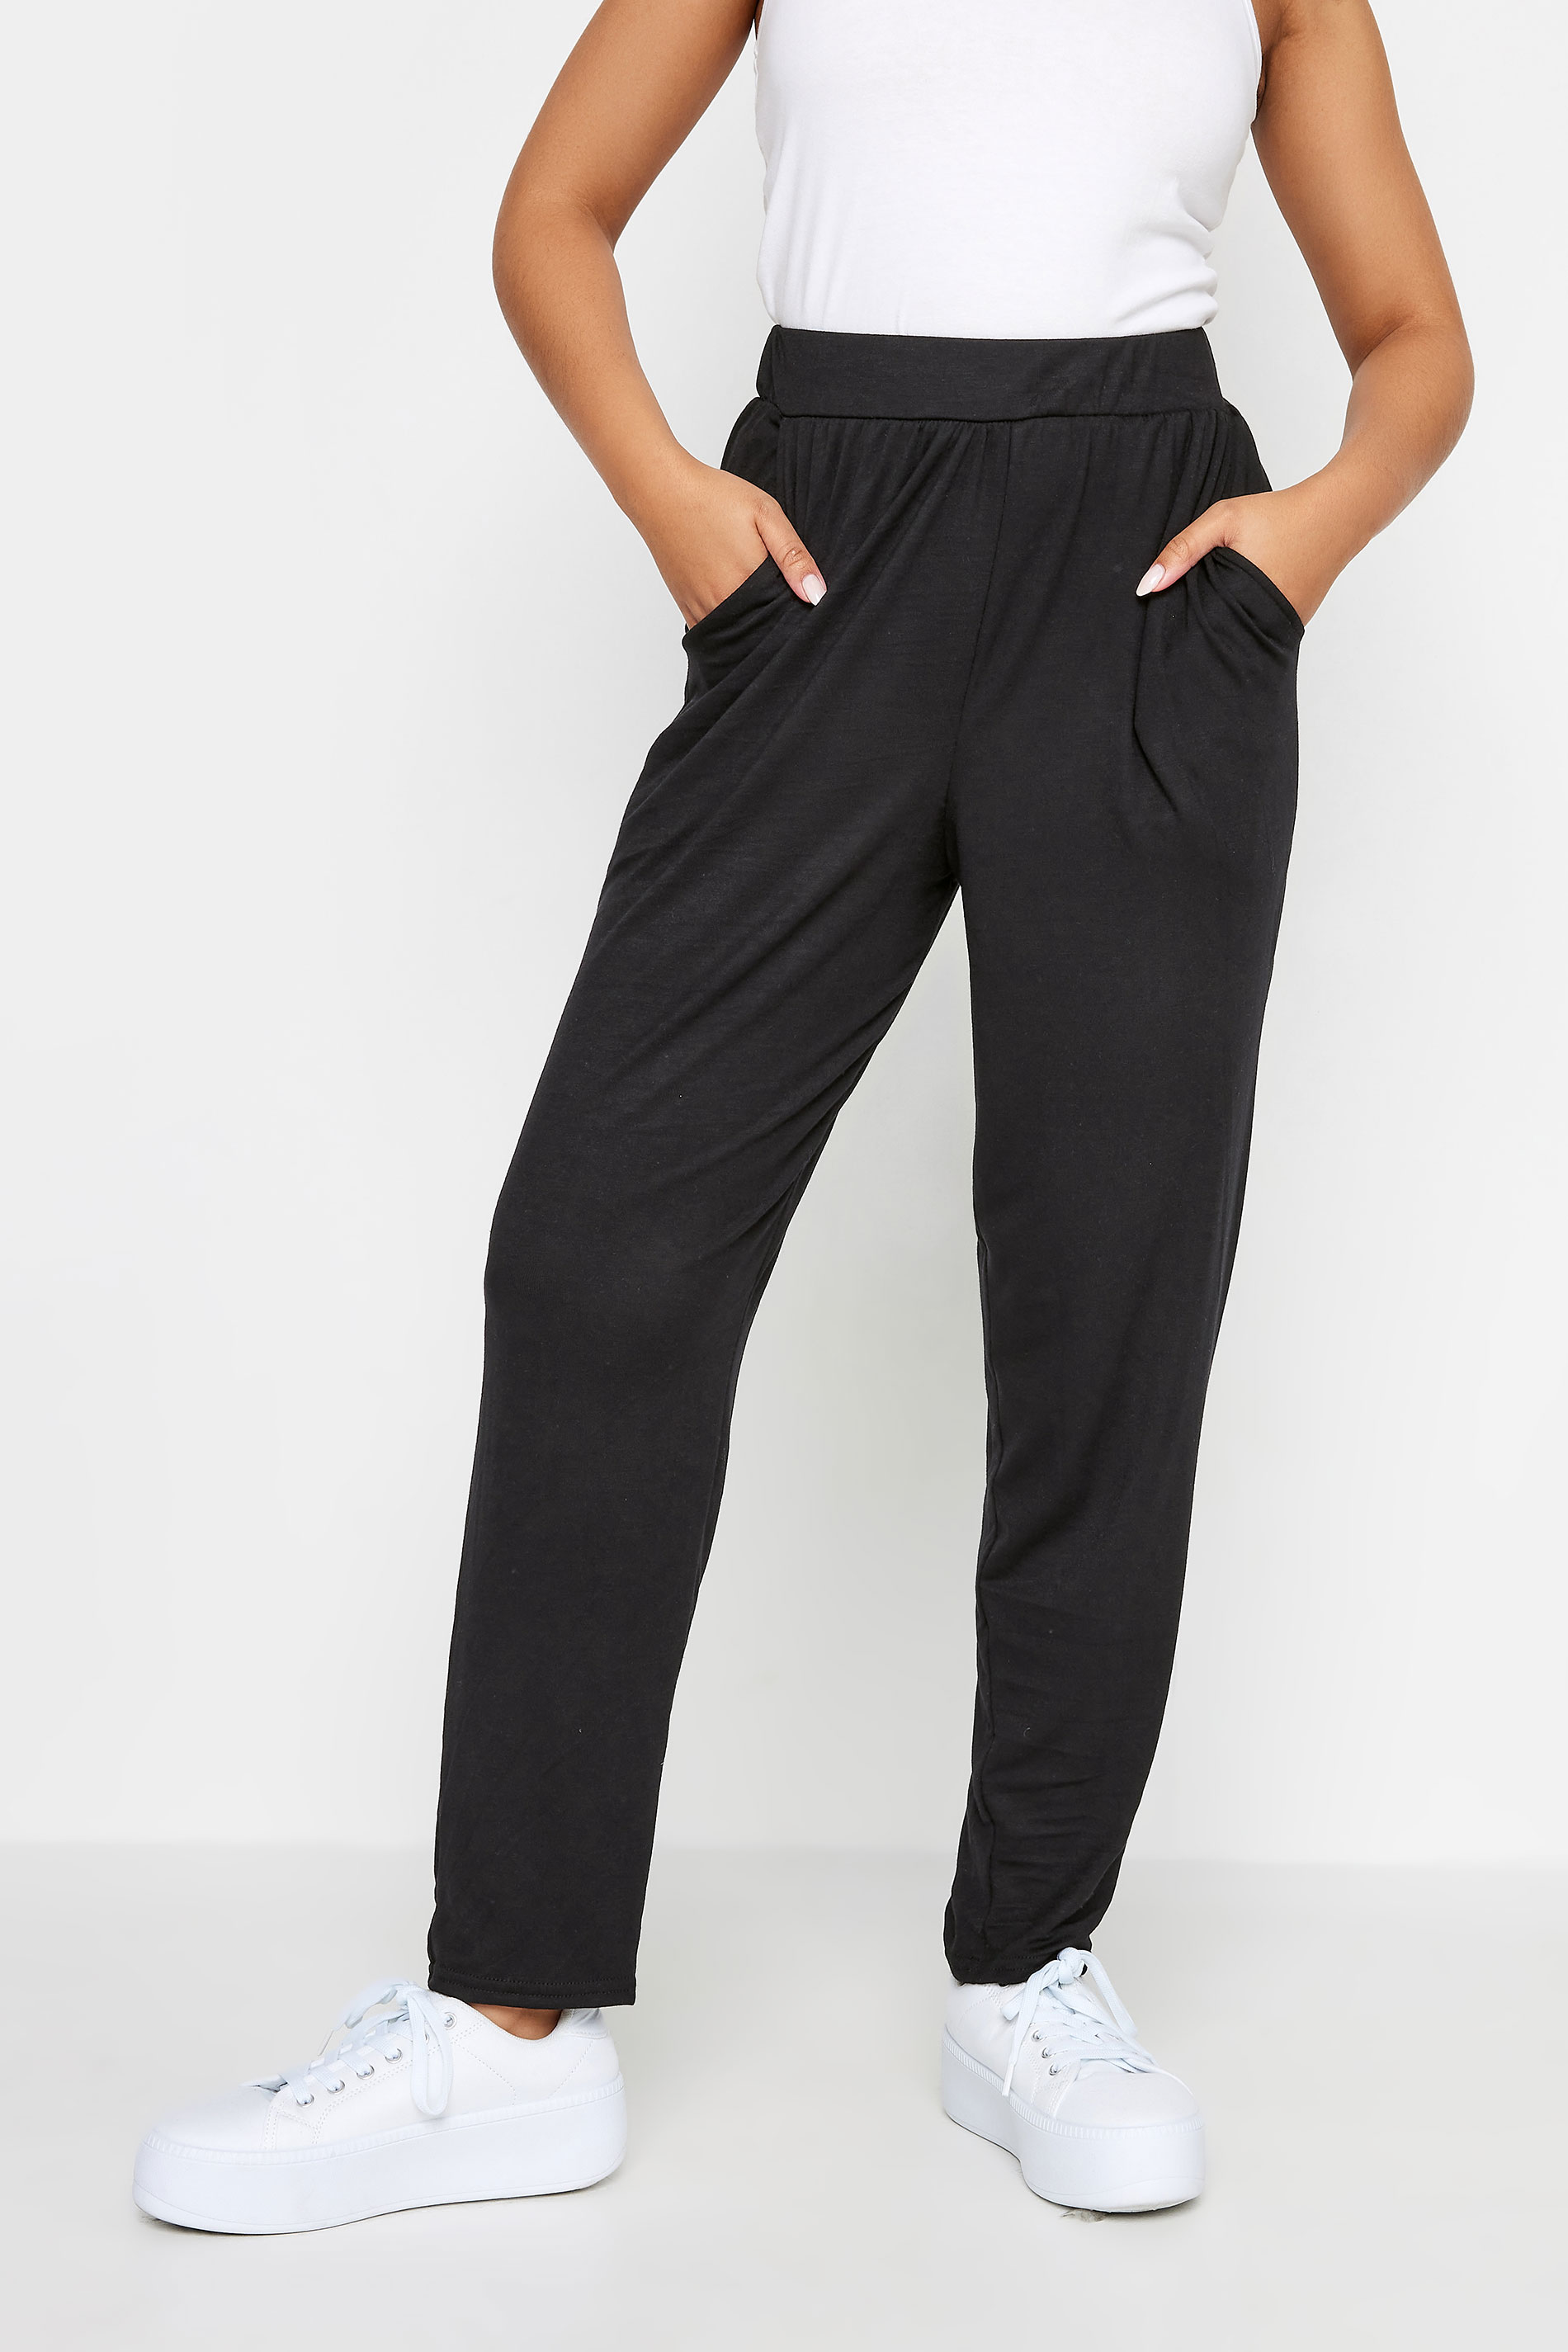 MAMA Textured jersey trousers - Black - Ladies | H&M IN